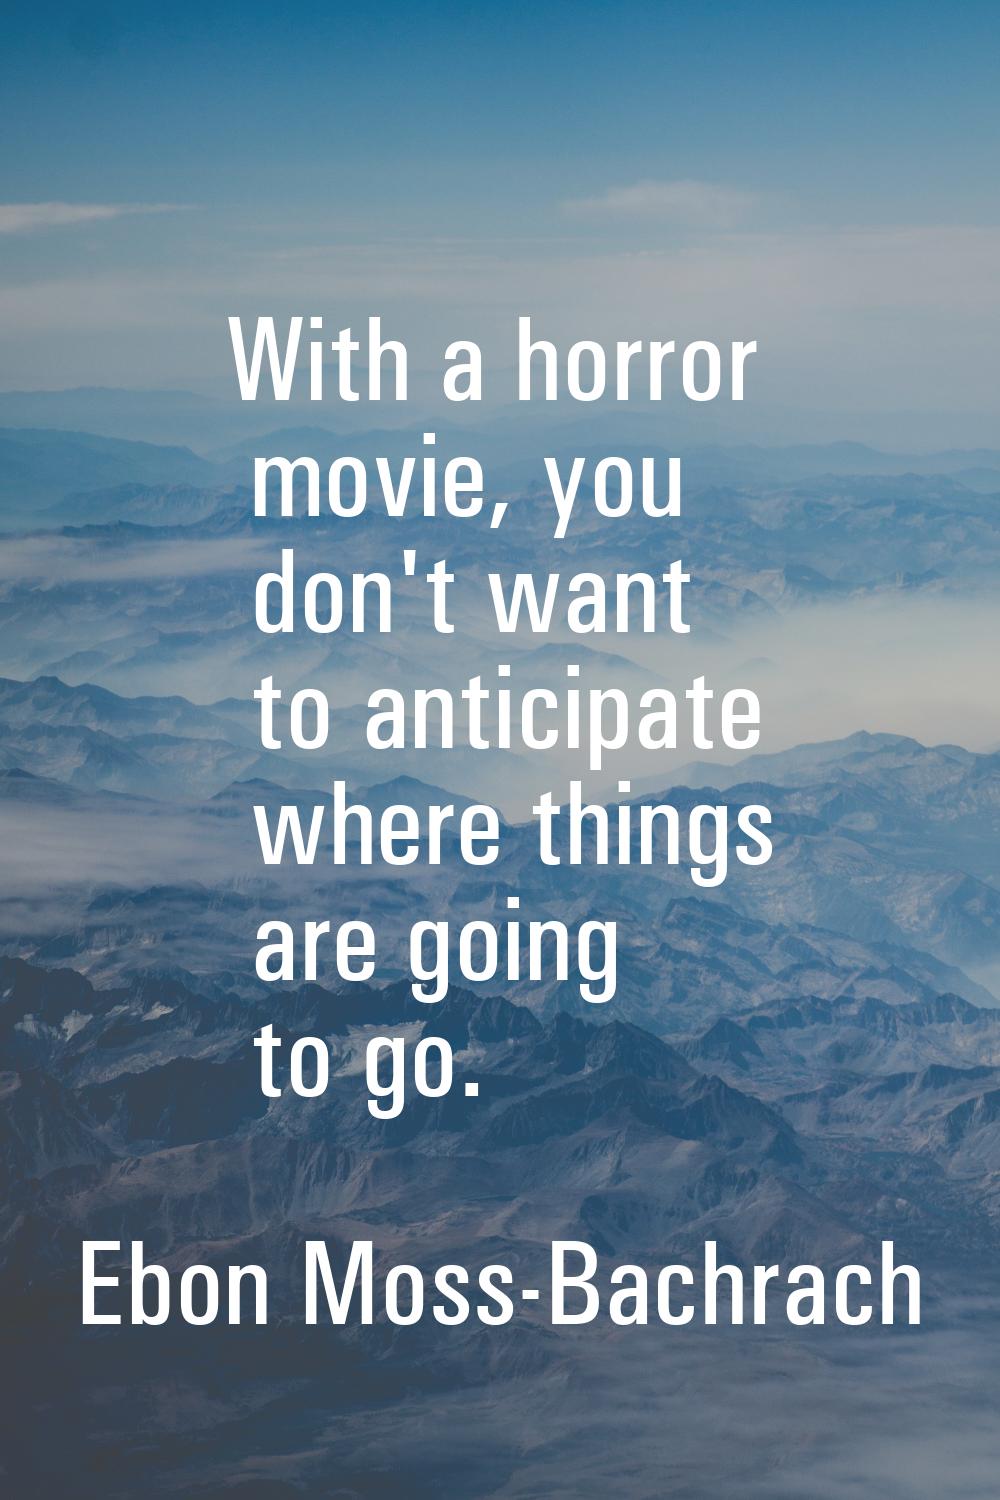 With a horror movie, you don't want to anticipate where things are going to go.